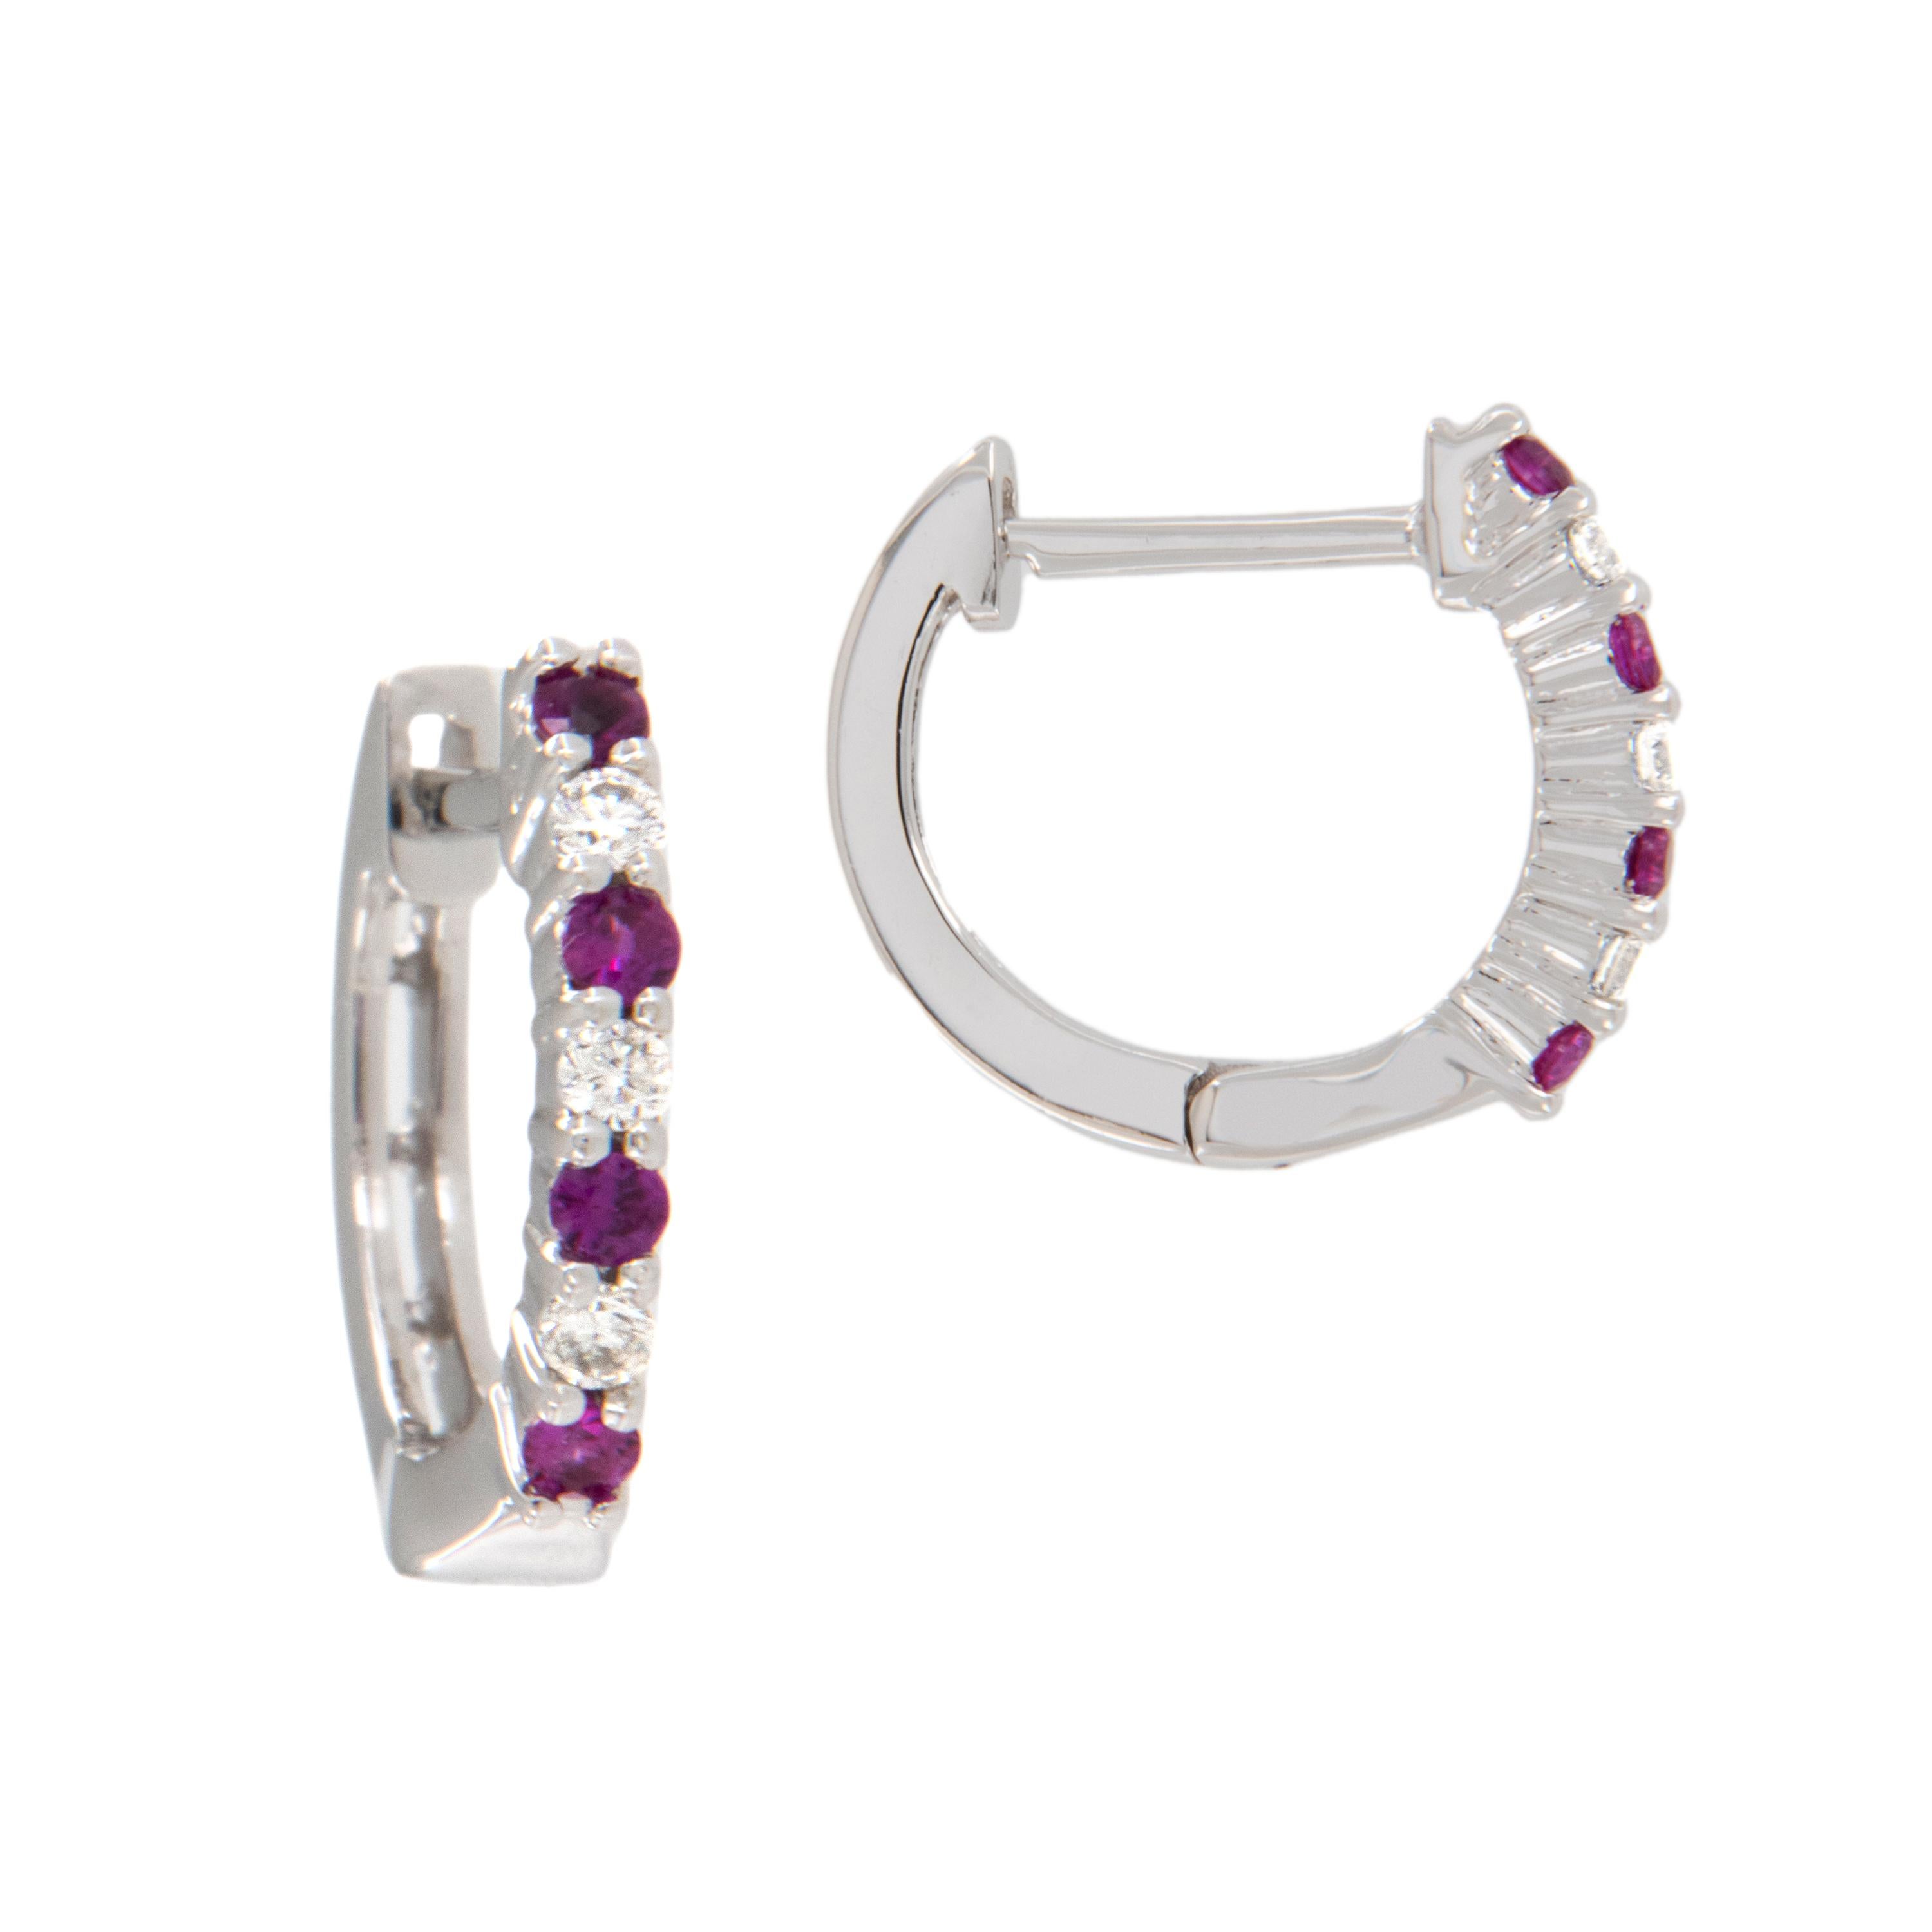 These bright mini hoop earrings are made in 14 karat white gold and look sweet on your ears! Shared prong set with 8 juicy red  rubies = 0.10 Cttw & 6 fine white diamonds = 0.06 Cttw these will be the most comfortable earrings you own because the